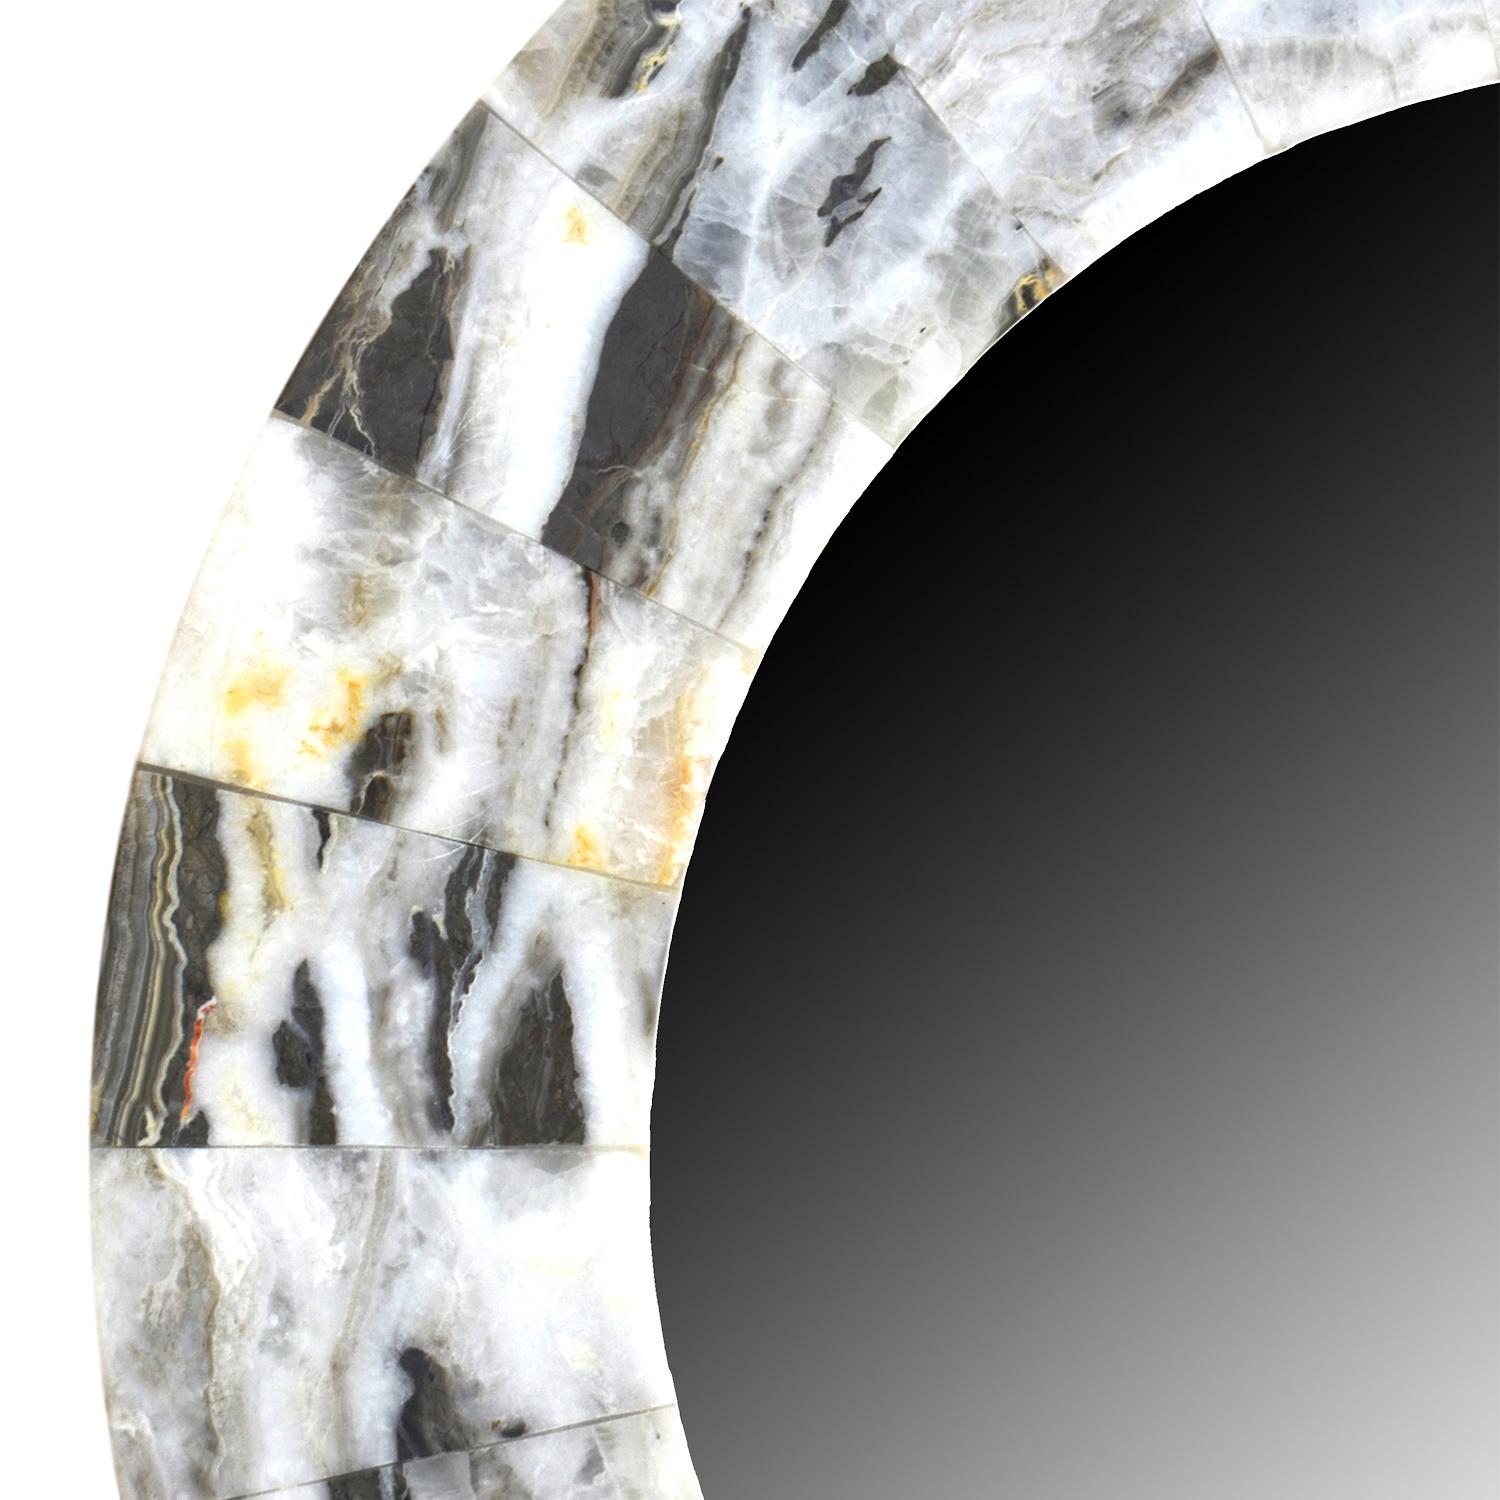 Rectangular mirror with thick frame made from Onyx.
Onyx Mirrors

Although there are a few other places in the world where the semi-precious stone Onyx exist, we found our collection in Mexico.

A Bit of Information on the Semi-Precious Stone